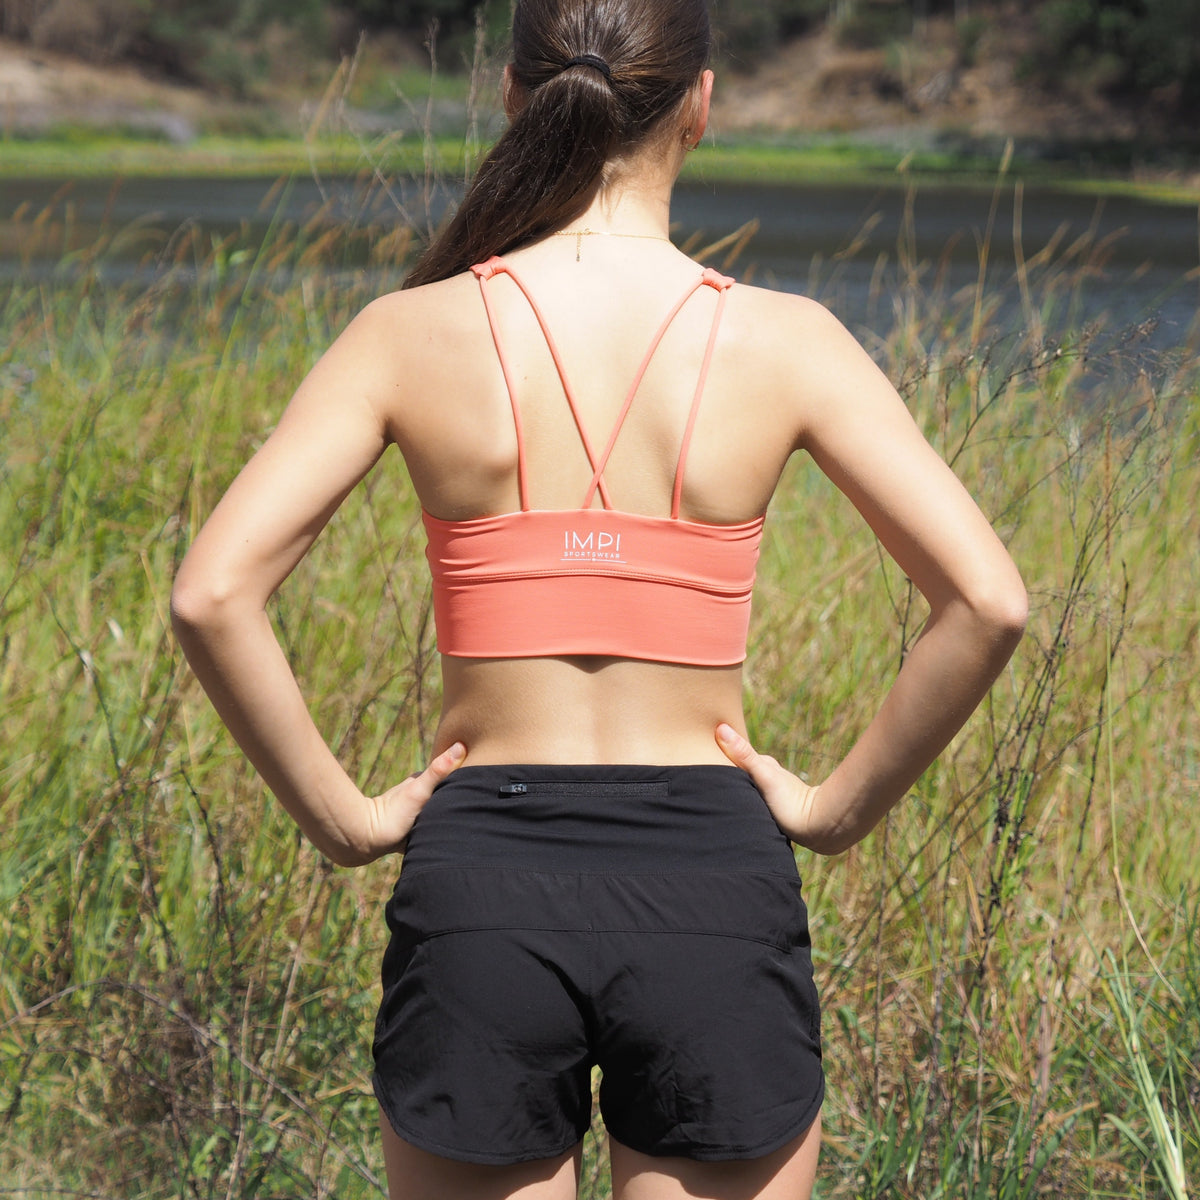 IMPI New Fit Longer Strappy Running Crop - Peach - Impi Sportswear